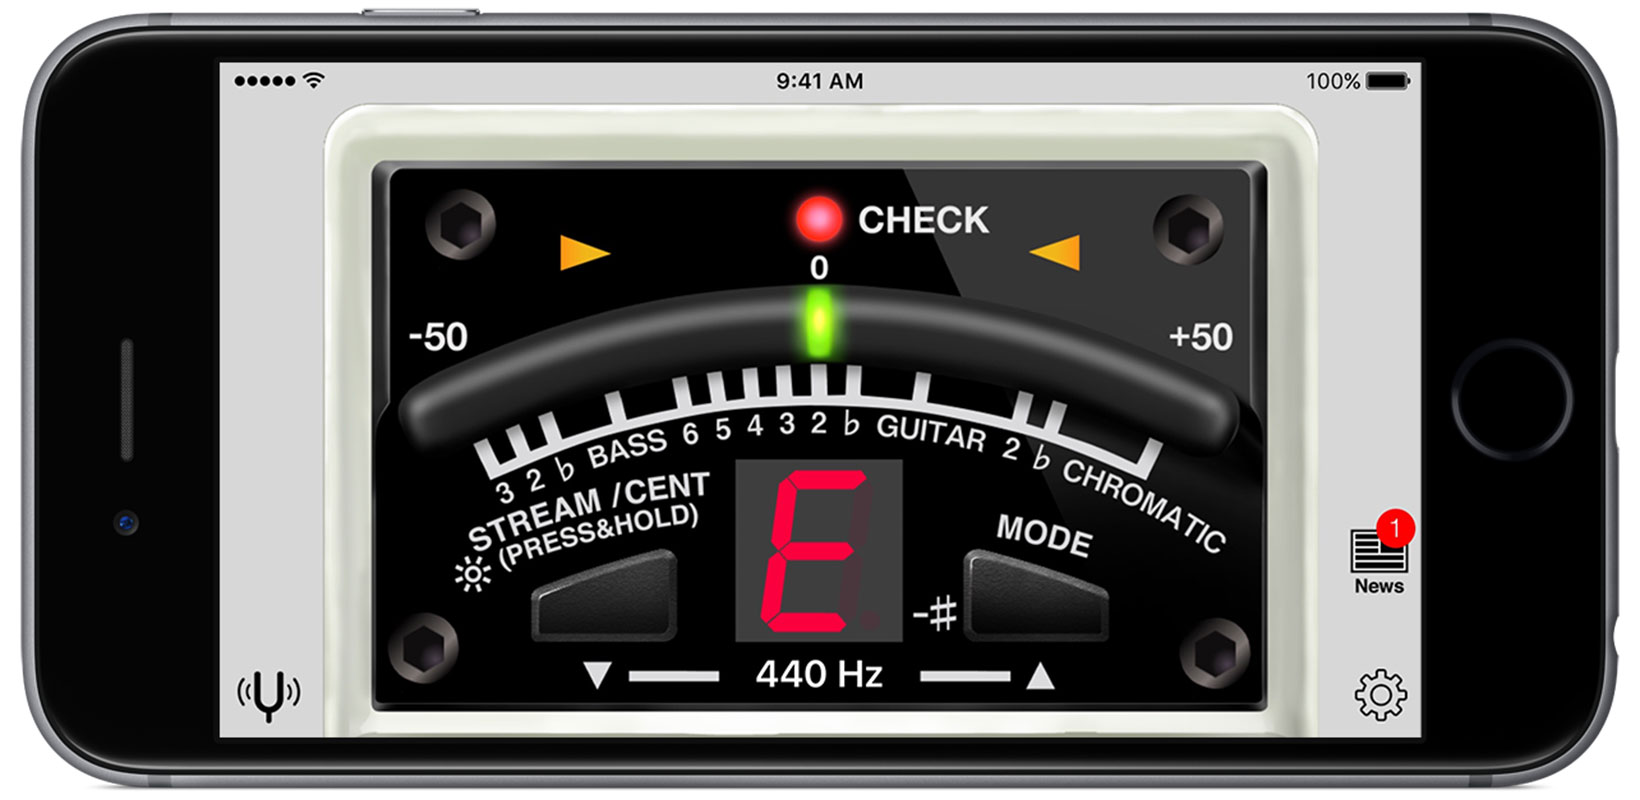 BOSS release a free app version of their famous tuner TU-3